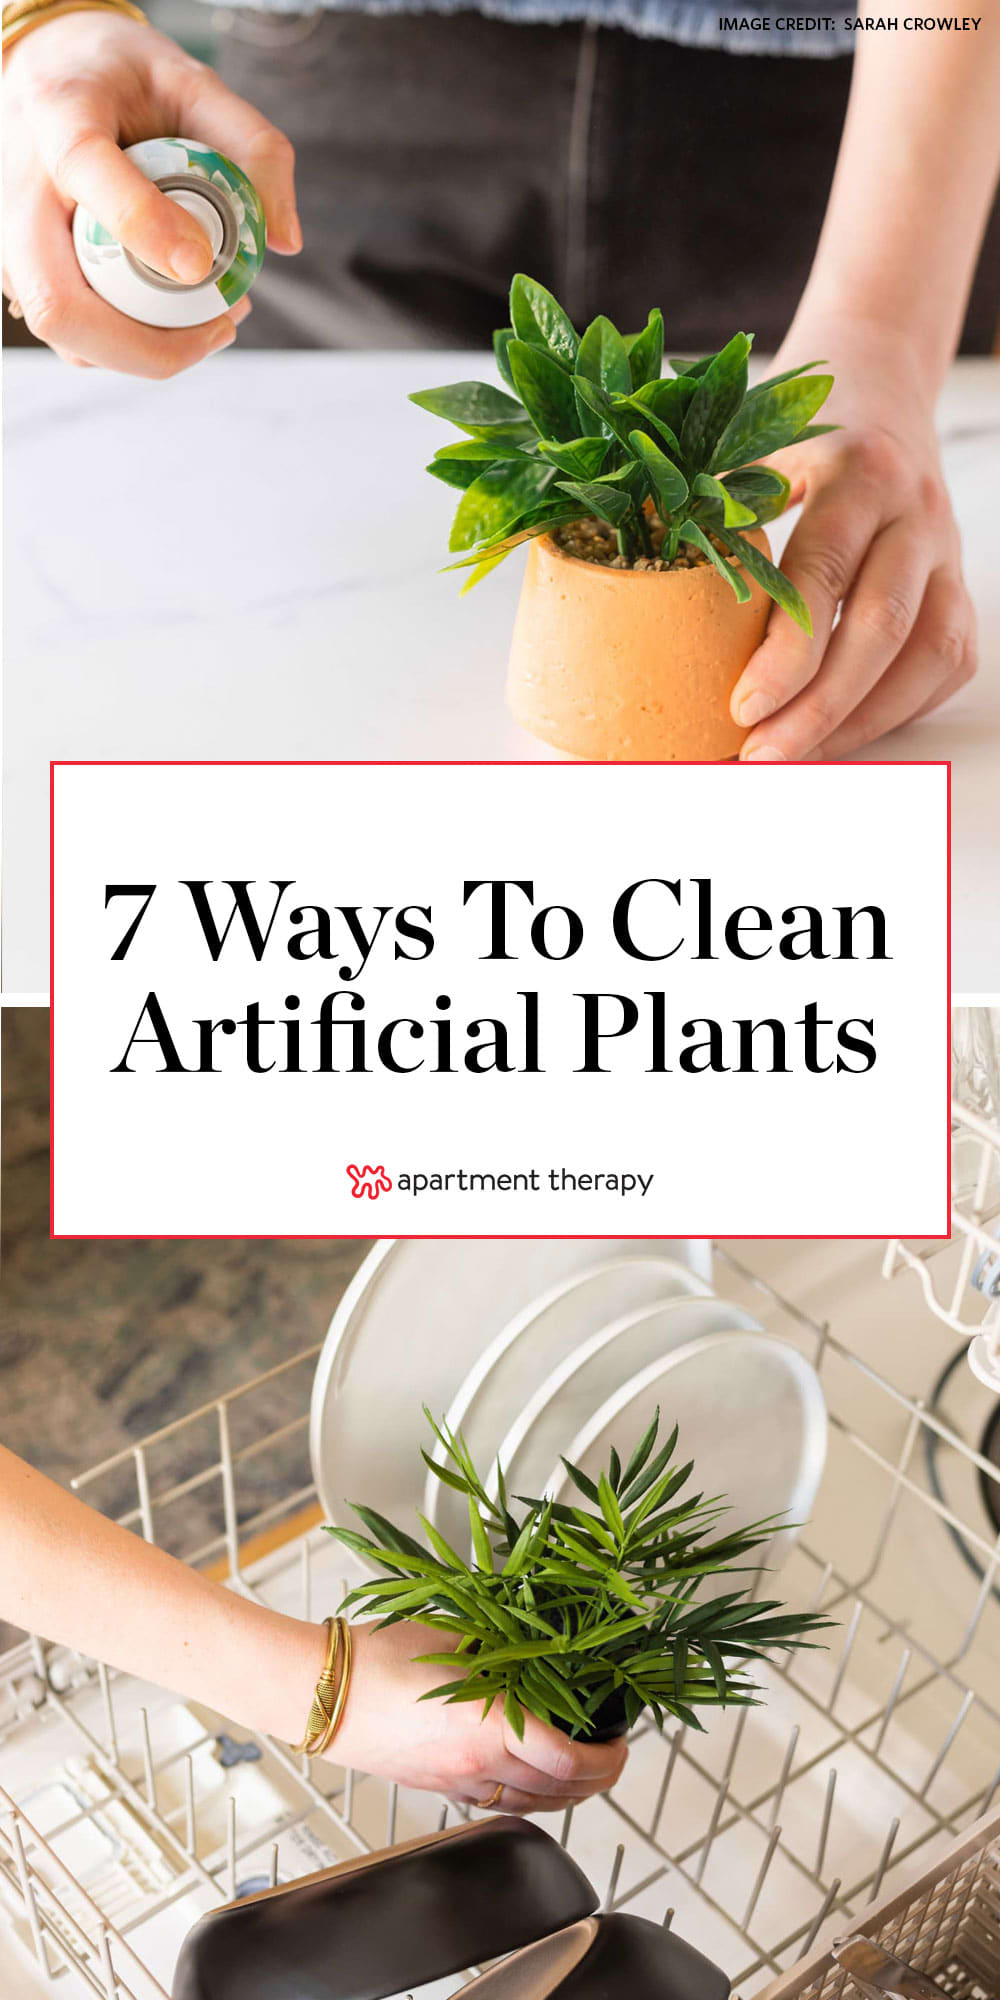 5 tips for maintaining artificial plants